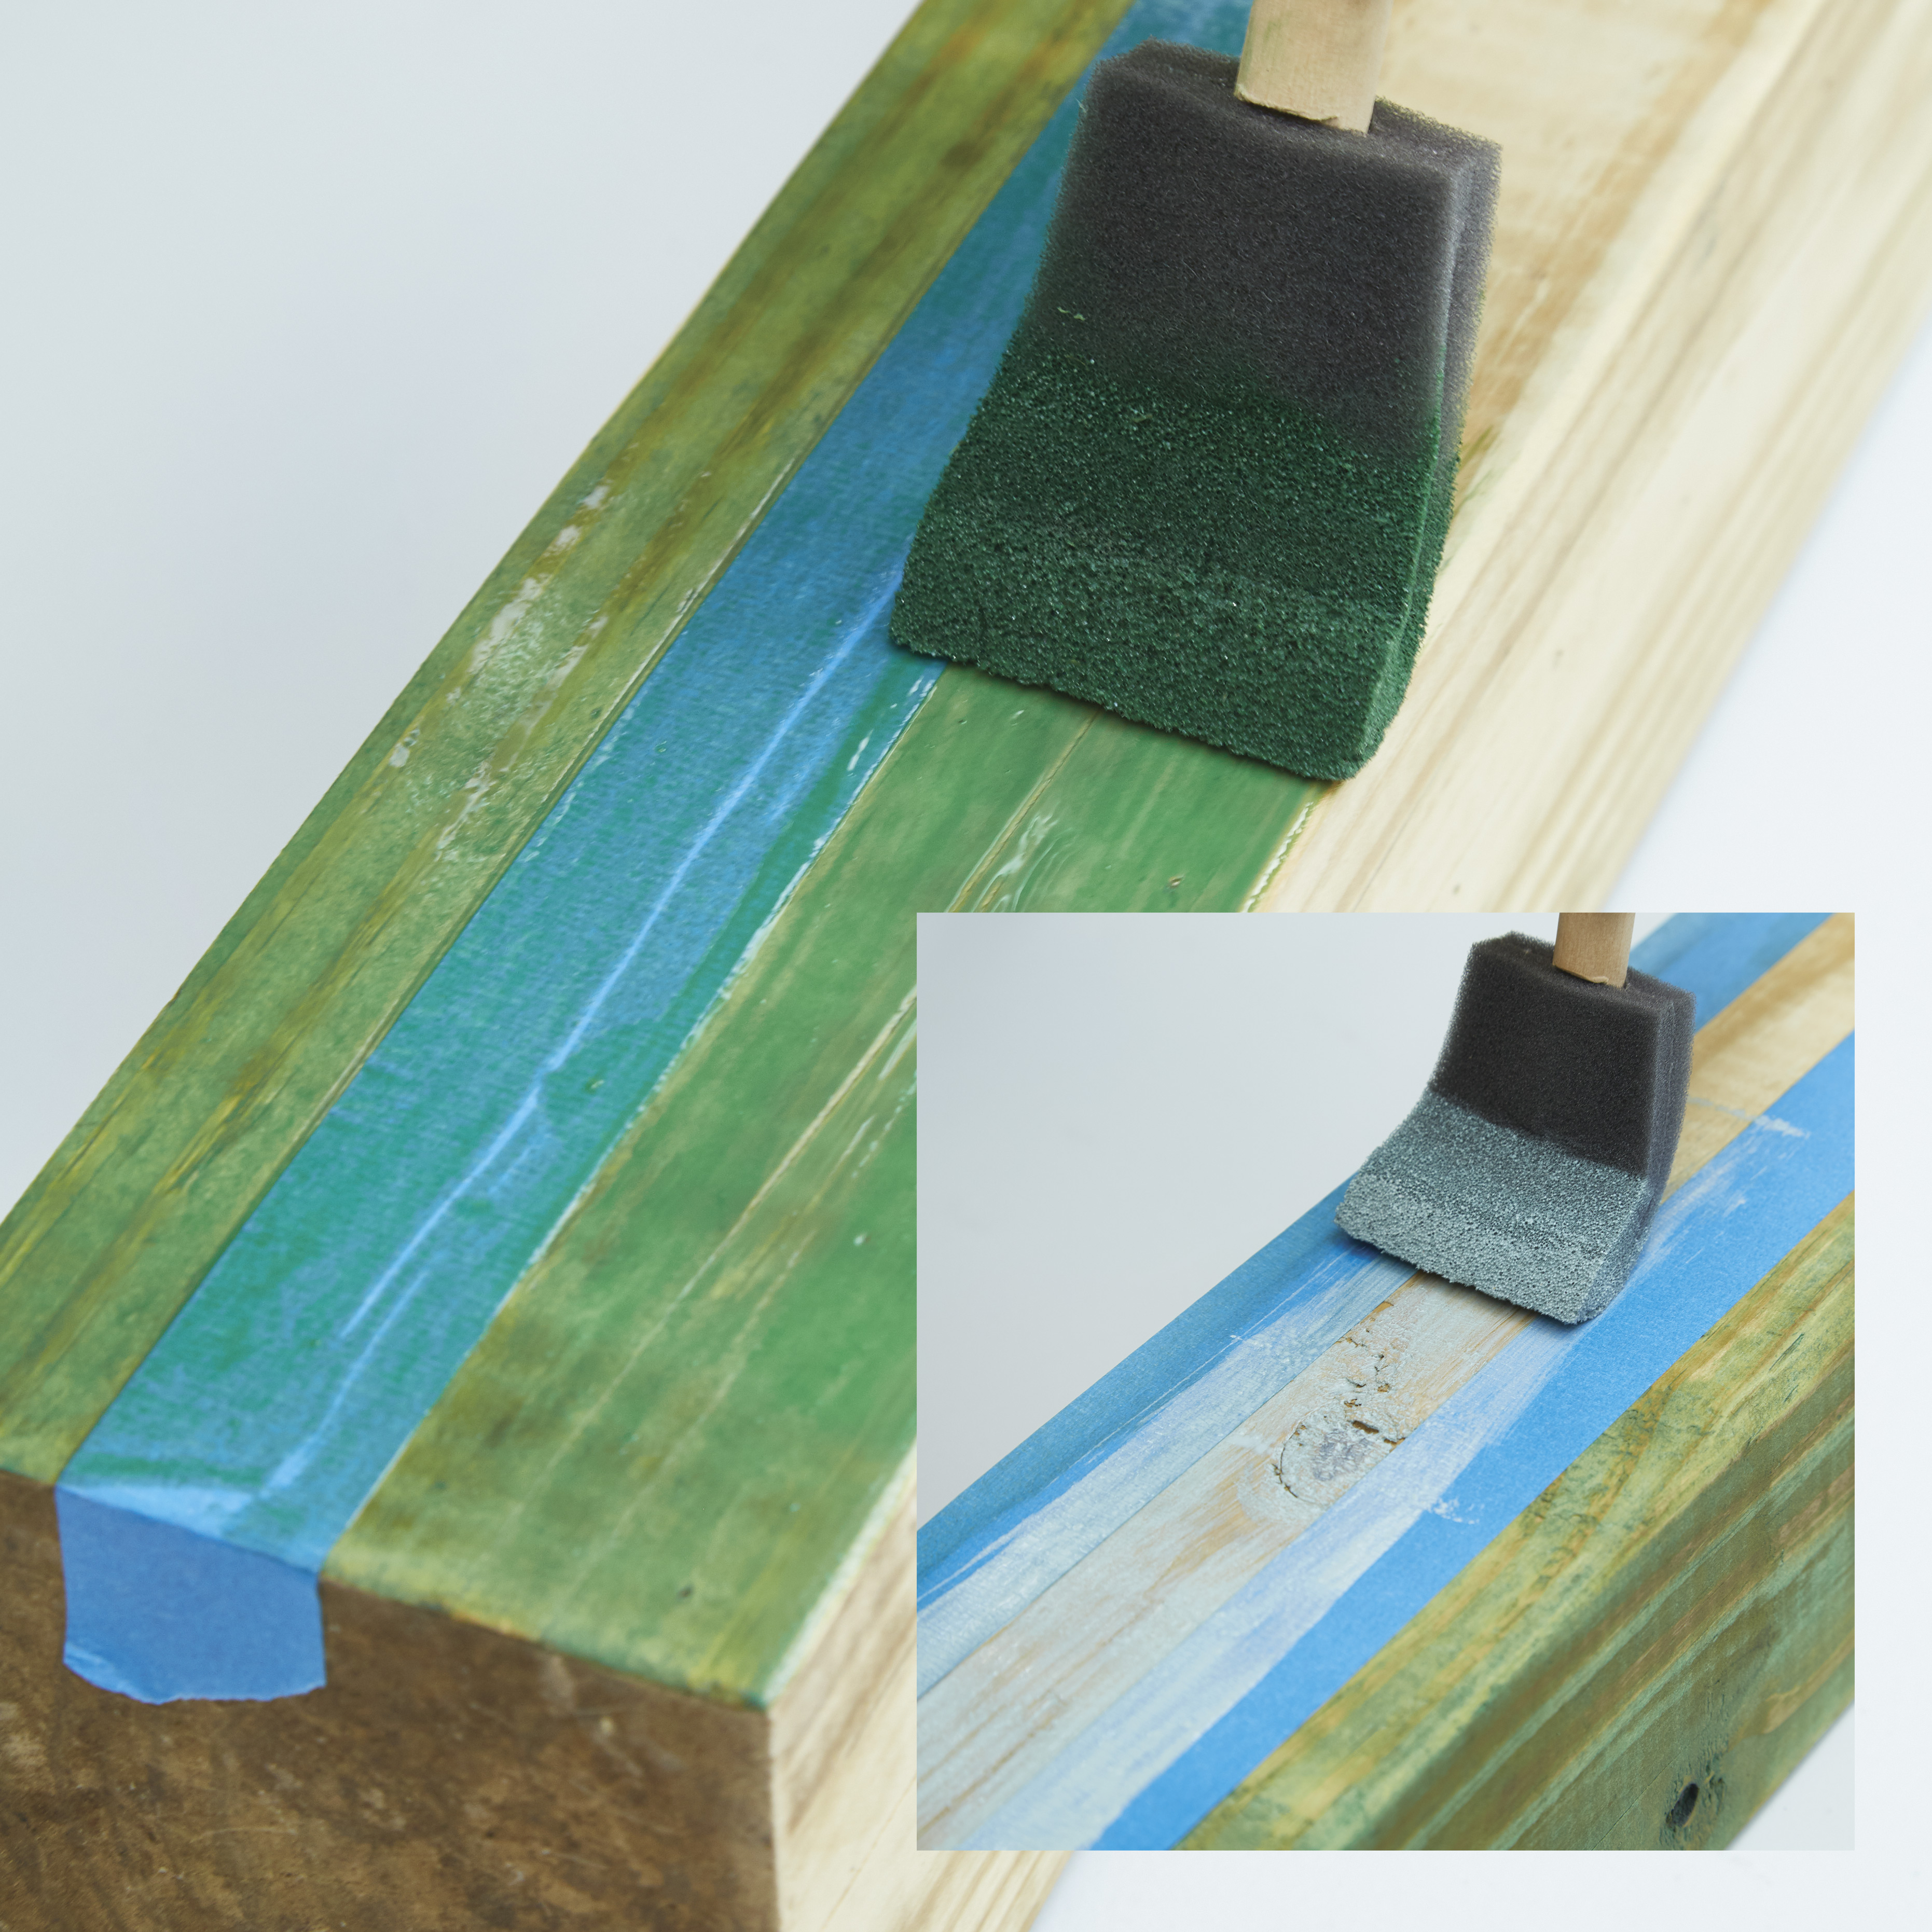 diy-garden-poles-staining: The stripe becomes the width of the painter’s tape. Apply light blue stain between two rows of painter’s tape (inset).